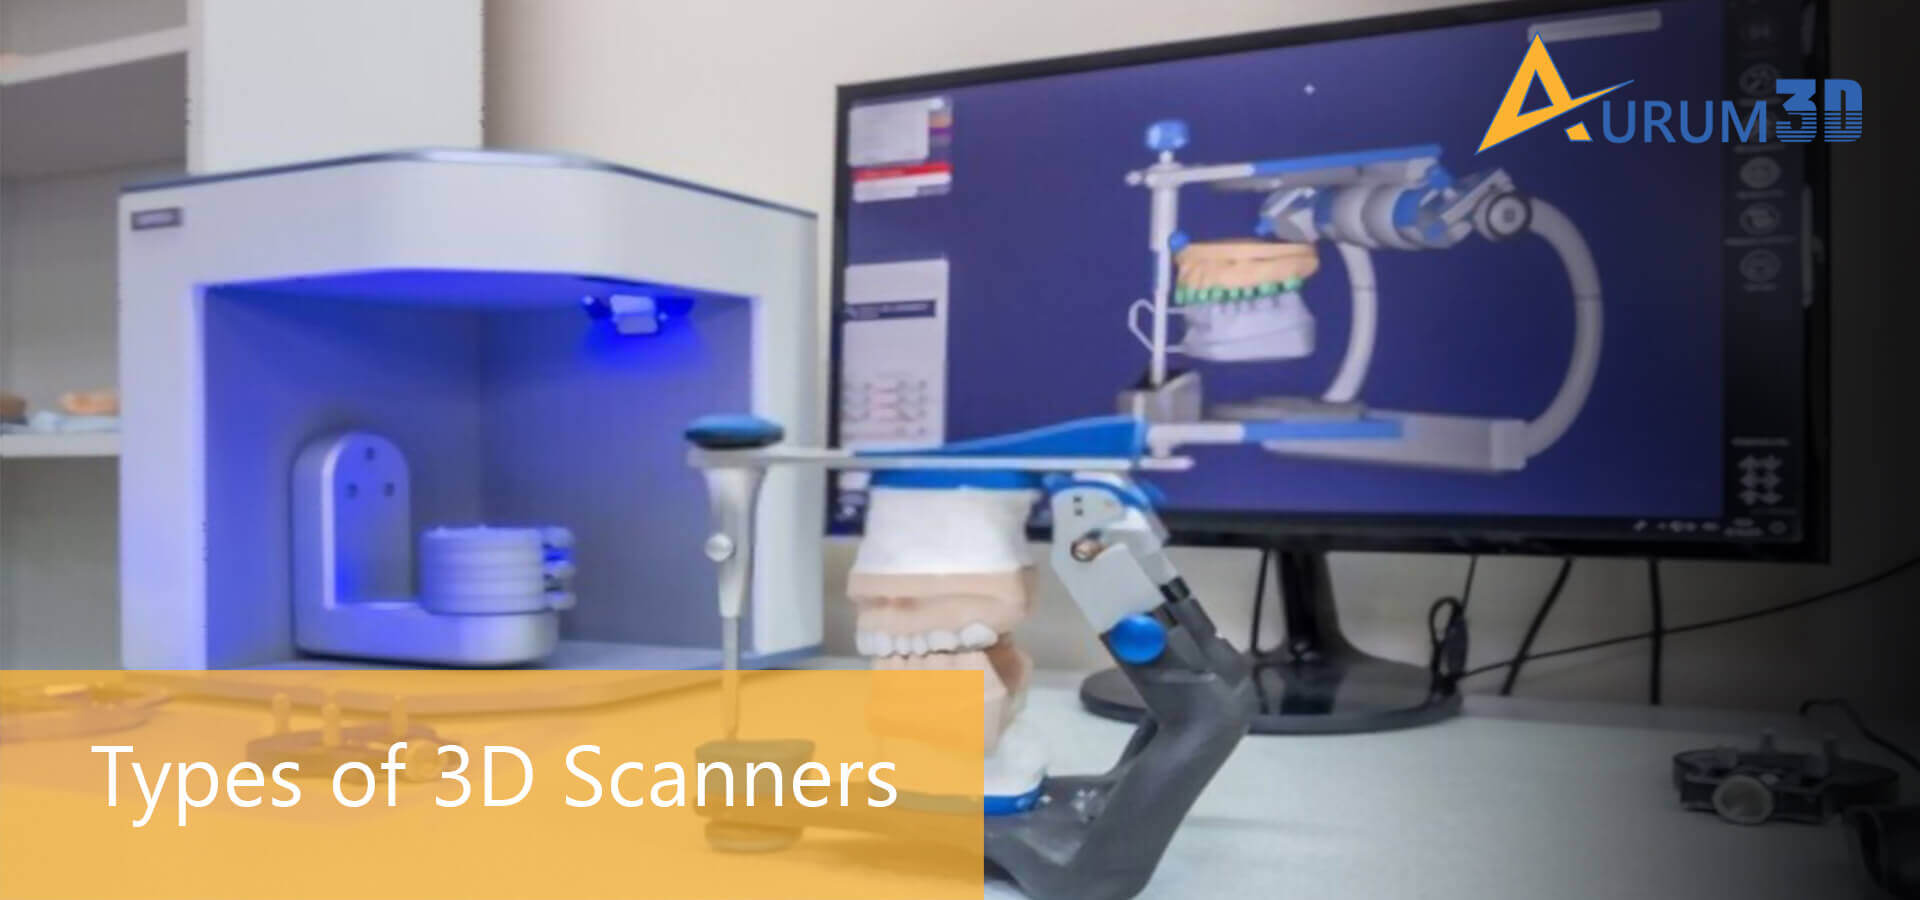 Types of 3D Scanners